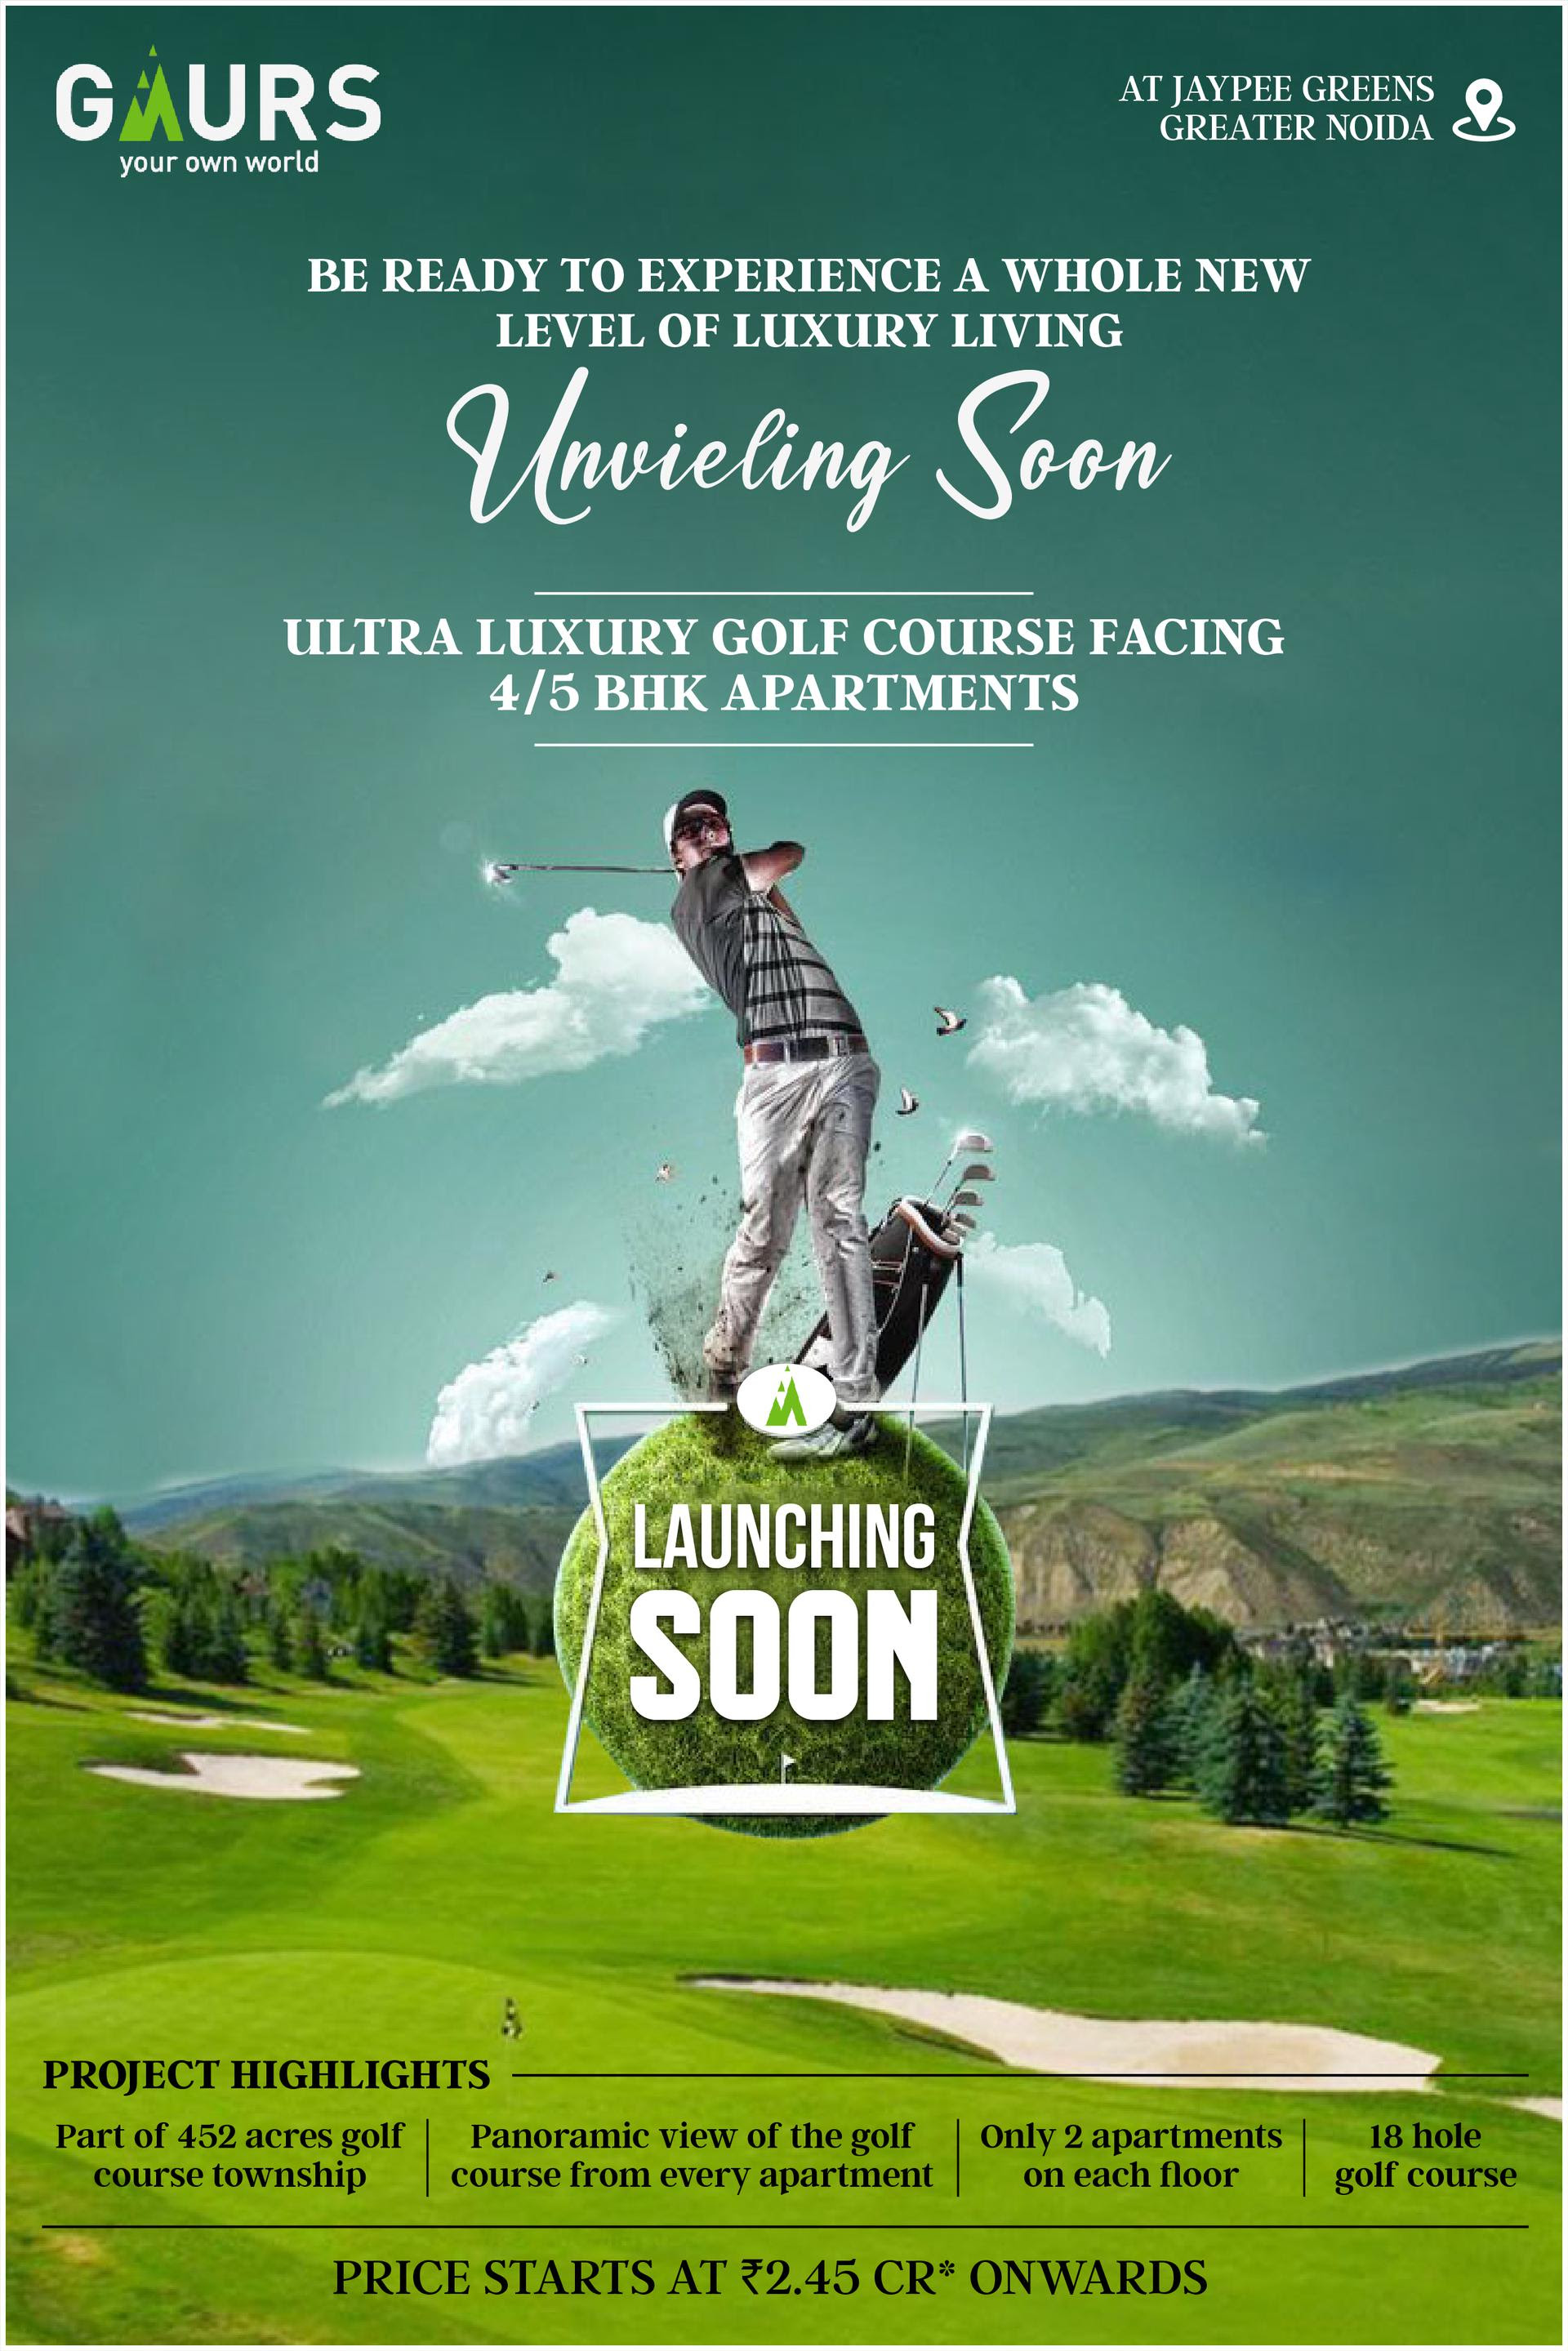 Ultre luxury golf course facing 4 and 5 BHK apartments Rs 2.45 Cr at Gaur Jaypee Green in Greater Noida Update